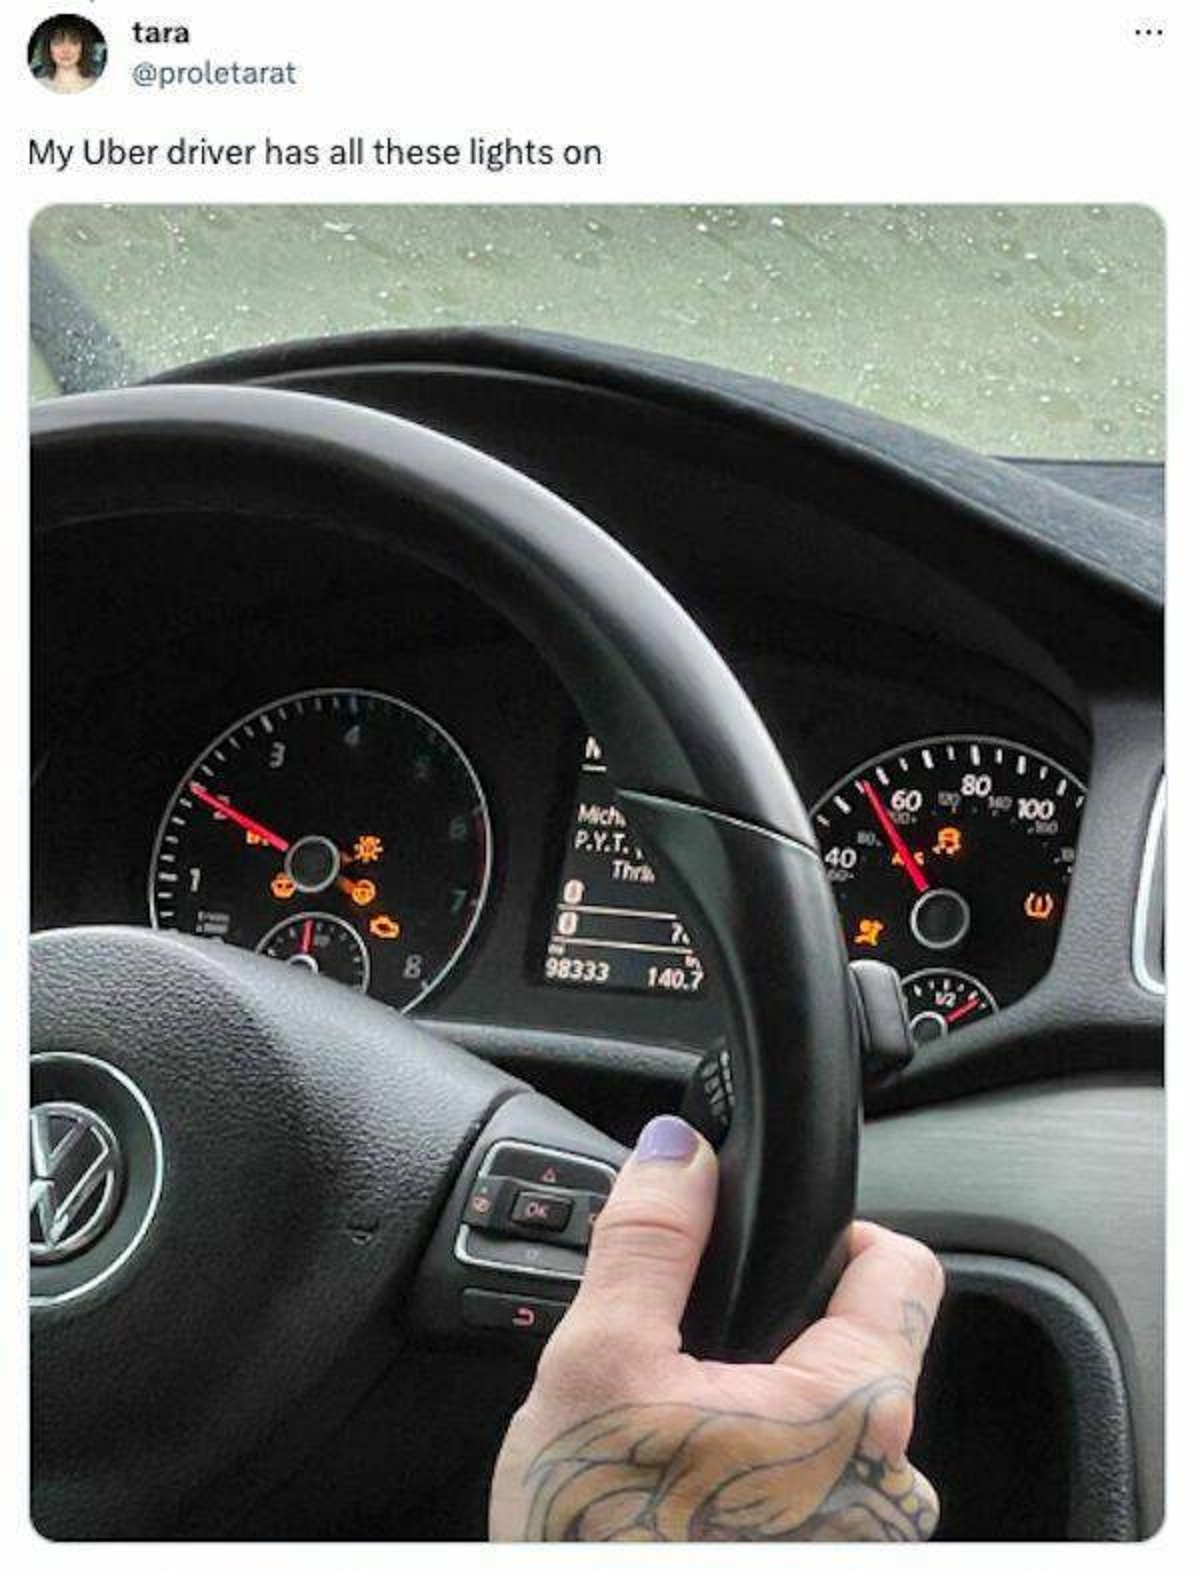 funny tweets - steering wheel - tara My Uber driver has all these lights on 11 7 Mich P.Y.T. Thr 98333 140.7 40 tr 80 60 29 300 A 100